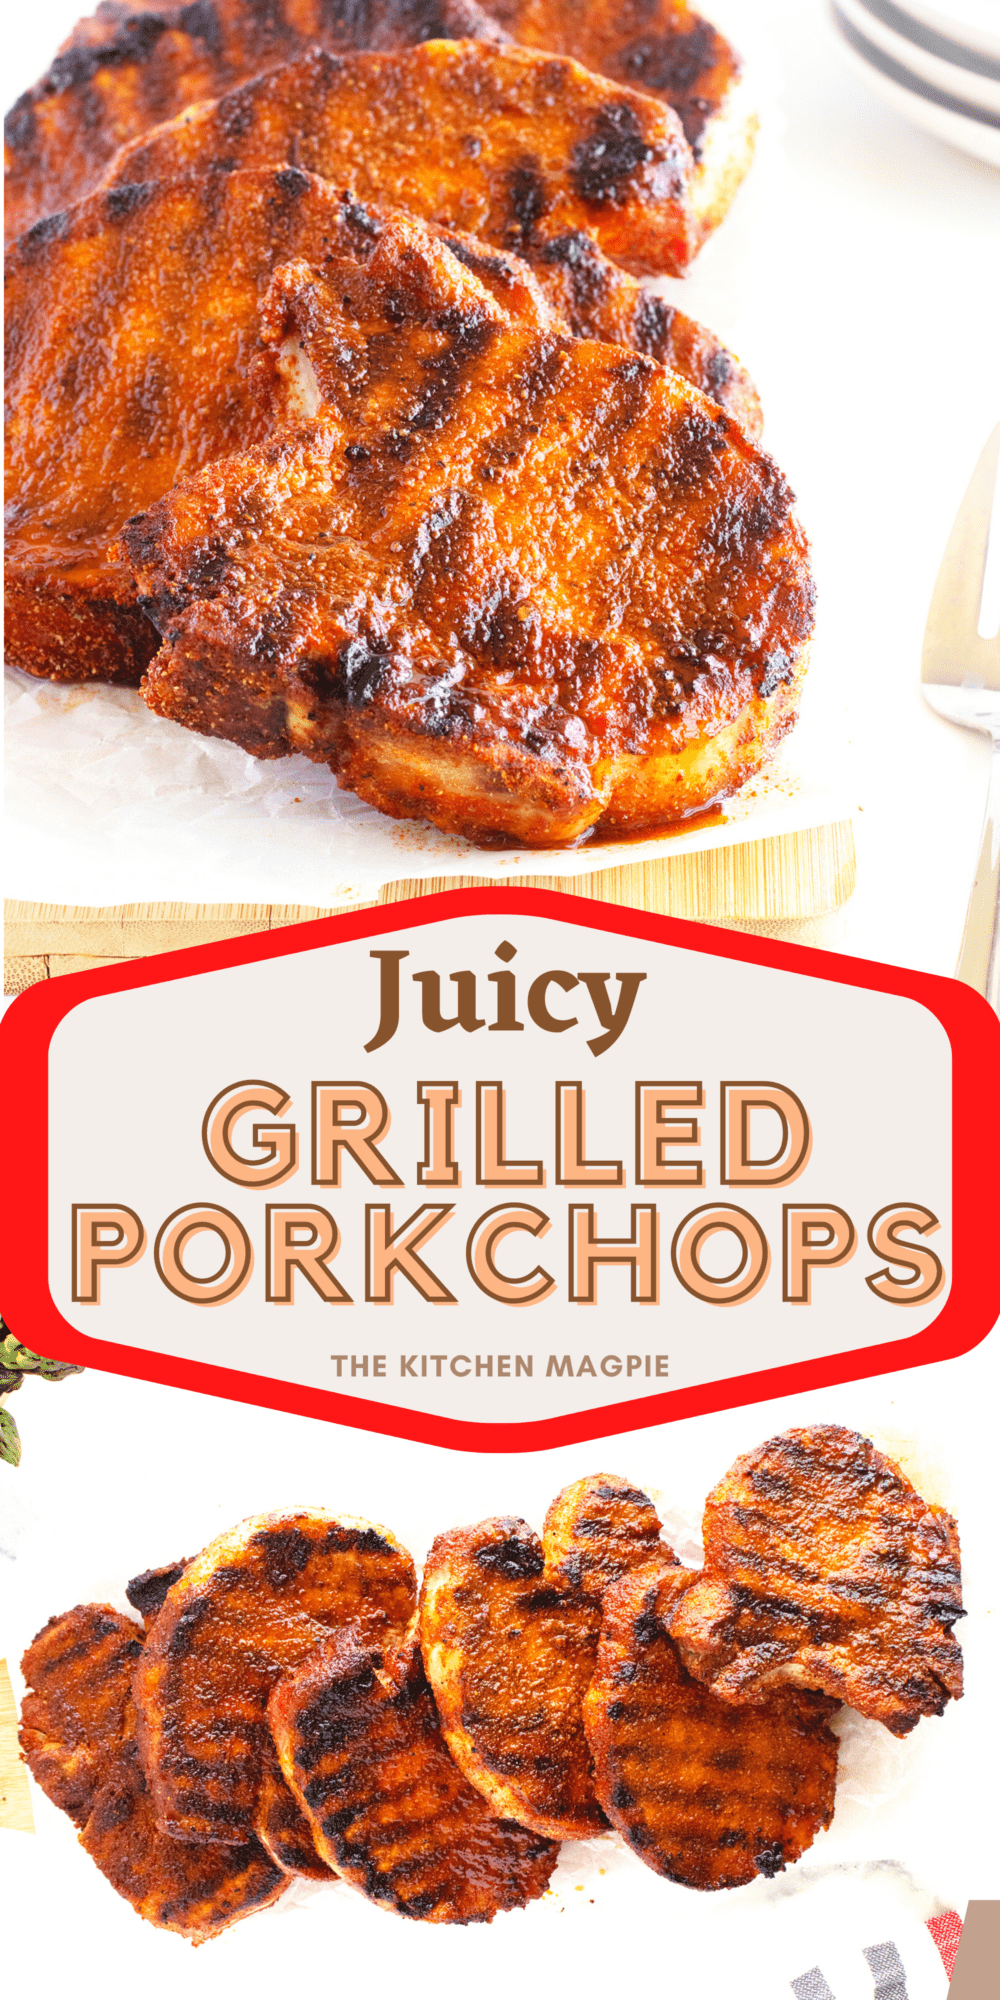 Pork chops are the classic North American treat dinner, and for a good reason. When done right, they are succulent, tender, and oh so delicious,